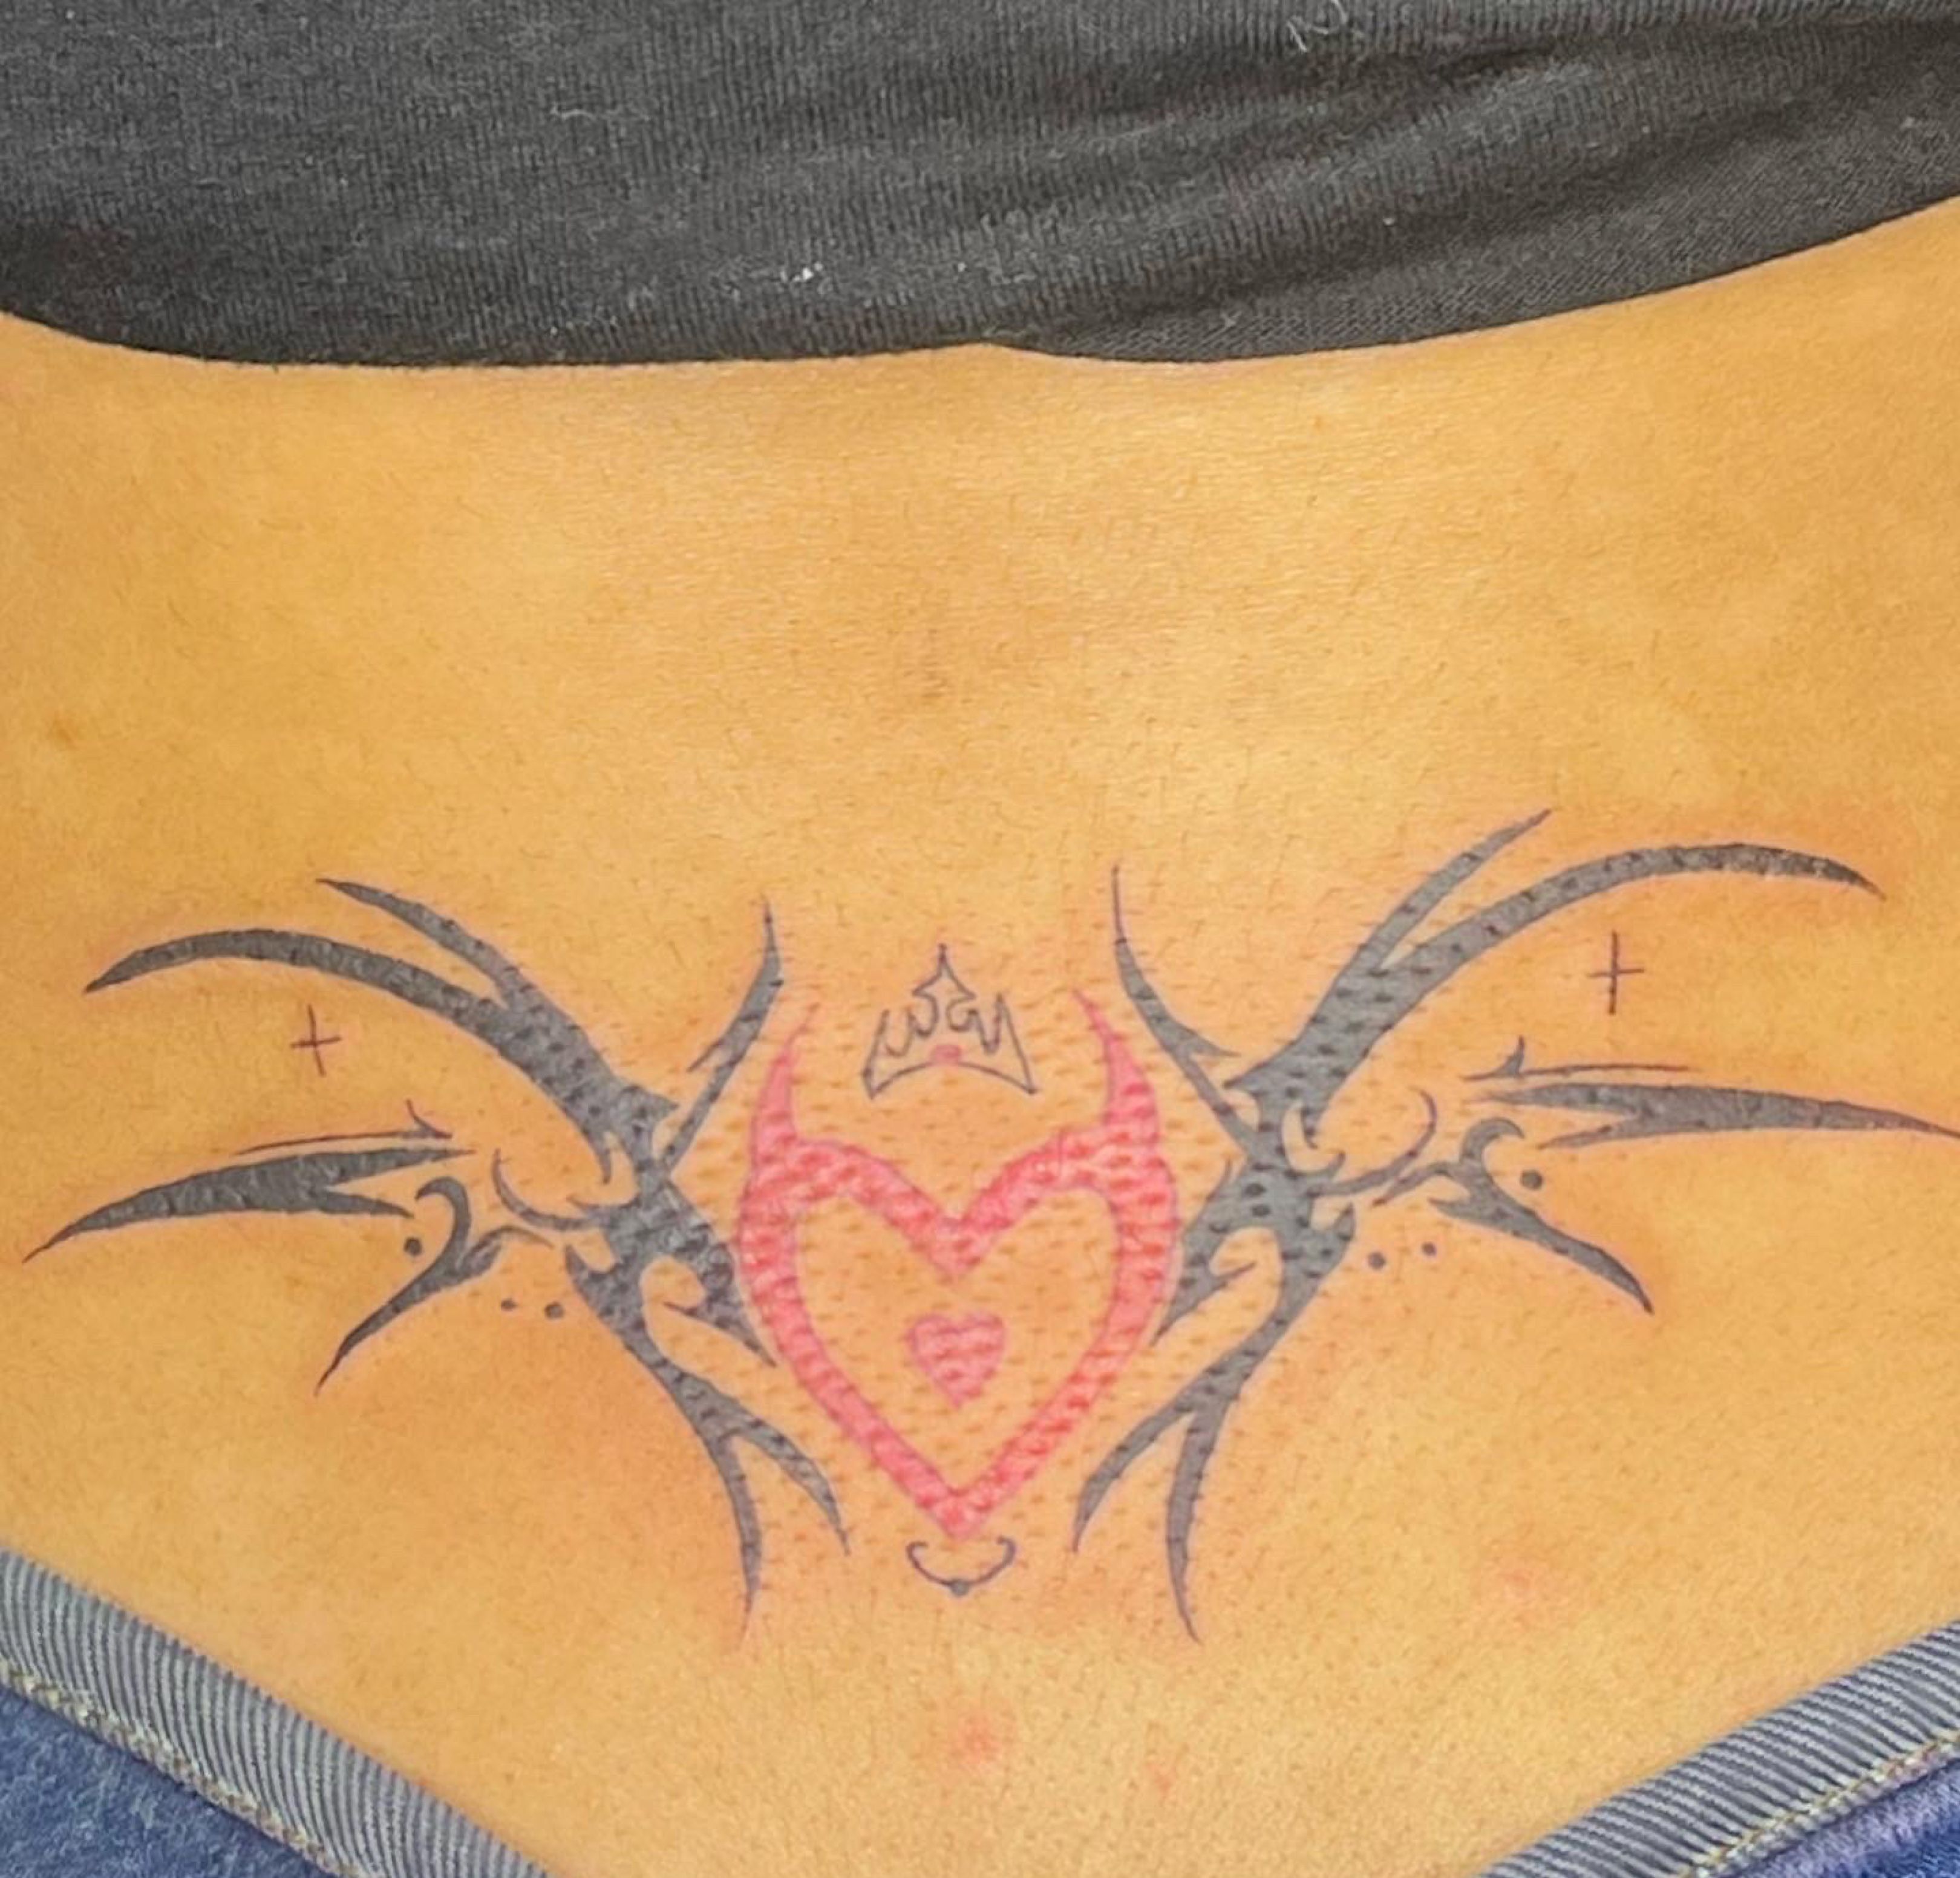 Tattoo Plan - Tramp Stamp (more in the comments) : r/TattooDesigns